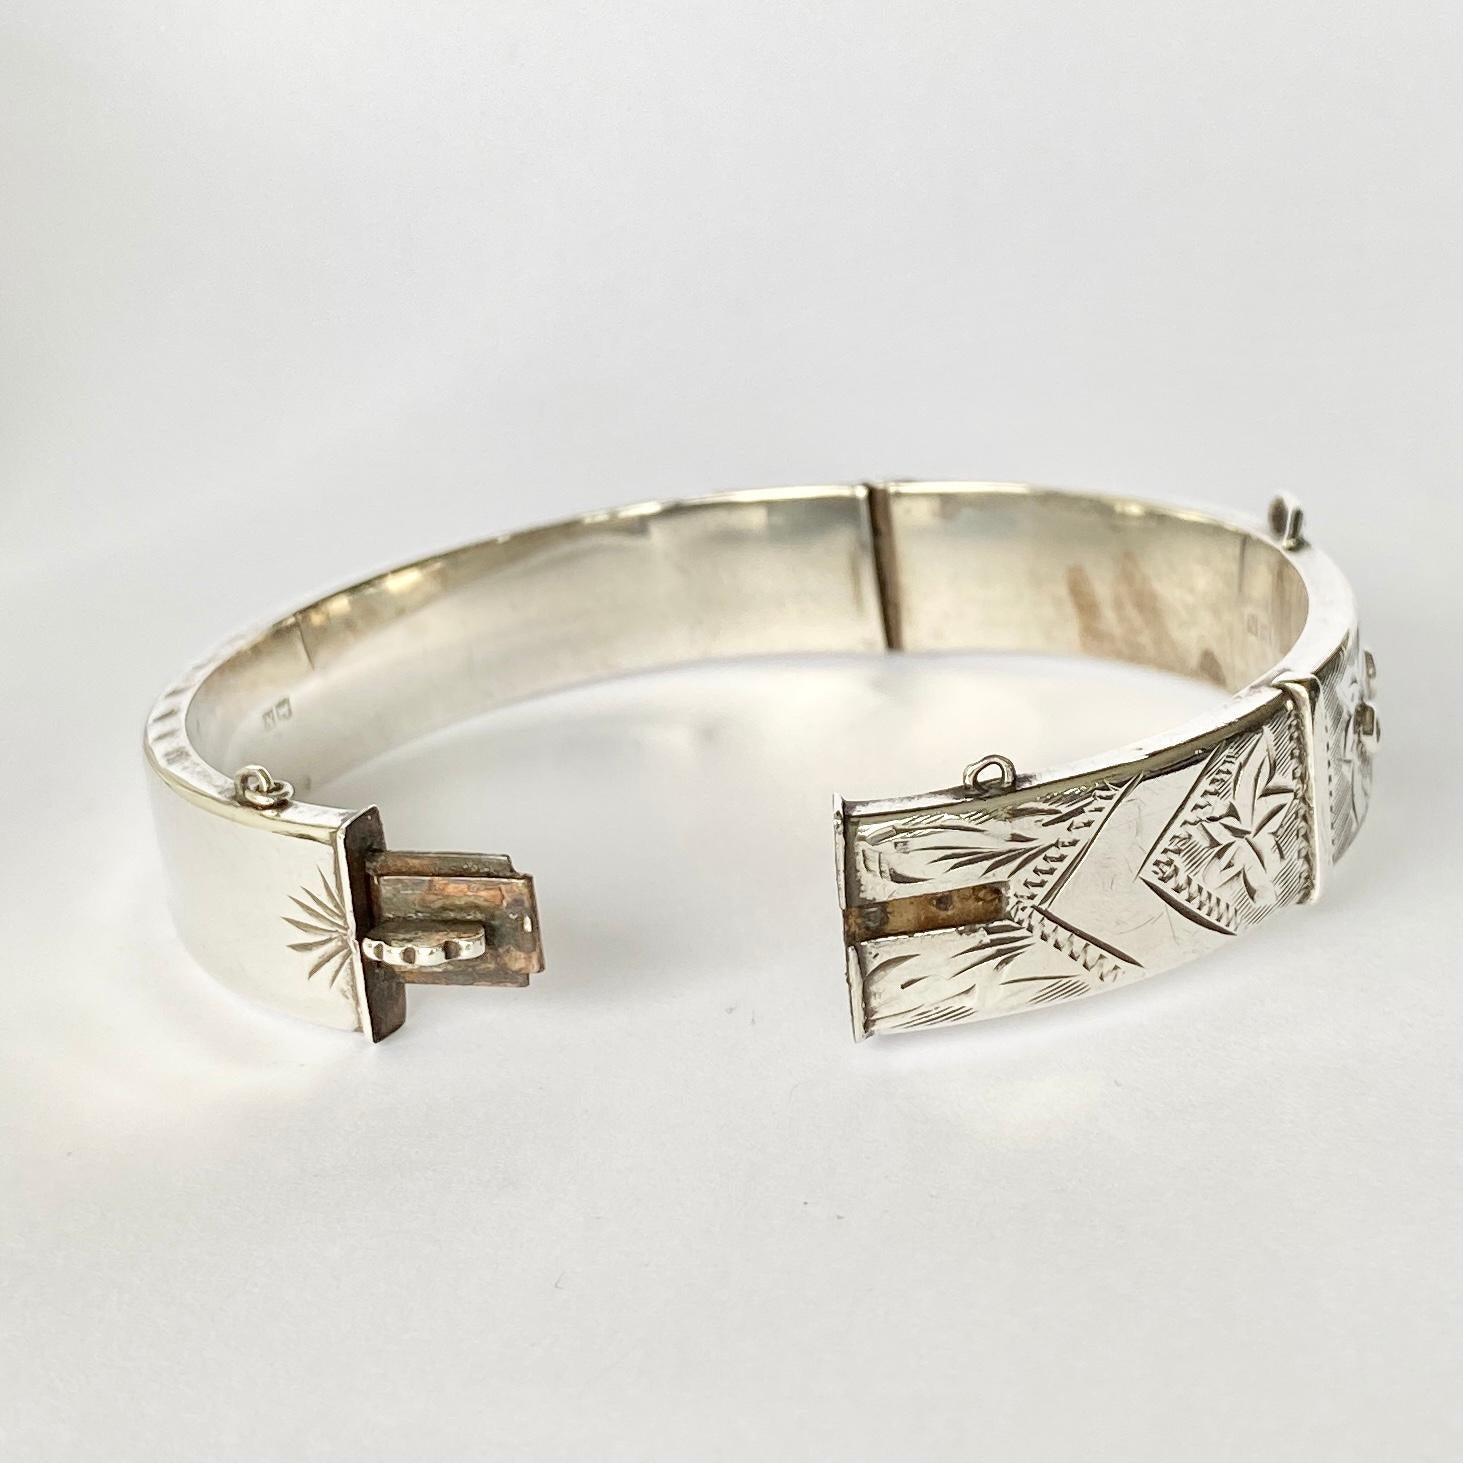 Deeply and intricately engraved on the front panel of this bangle is a classic swirl and textured design and a delicate buckle. Hallmarked Birmingham 1937. 

Inner Diameter: 60mm
Bangle Width: 14mm 

Weight: 20.2g